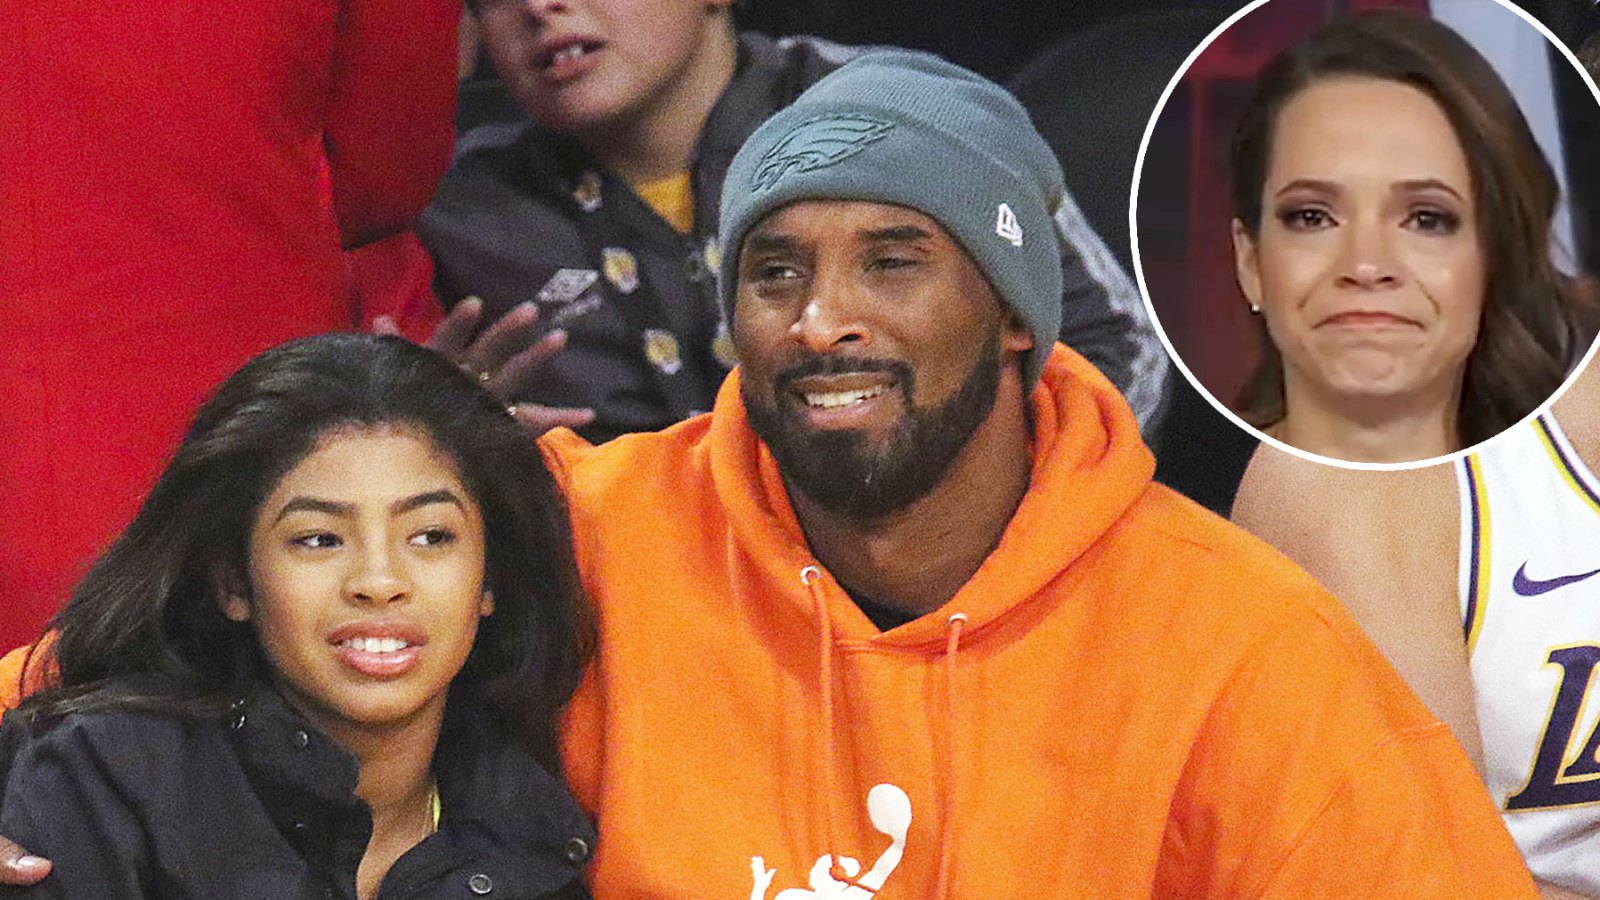 Kobe Bryant's Daughter Gets Now-Viral Moment at Taylor Swift